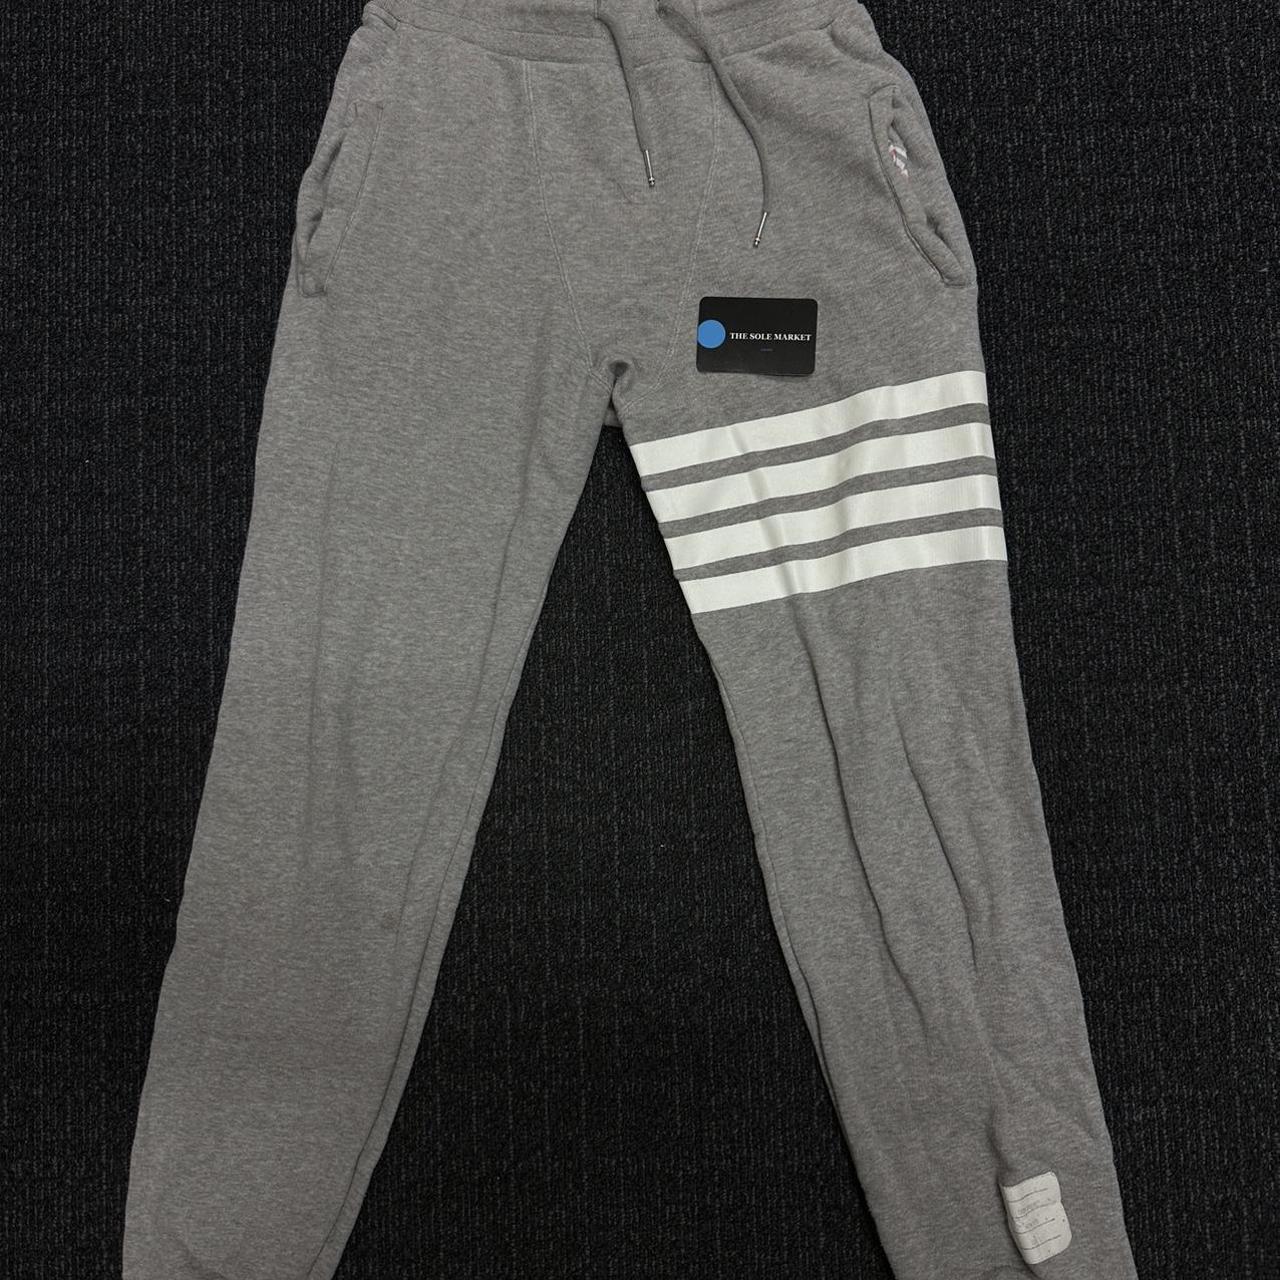 Thom Browne Men's Grey and White Joggers-tracksuits | Depop